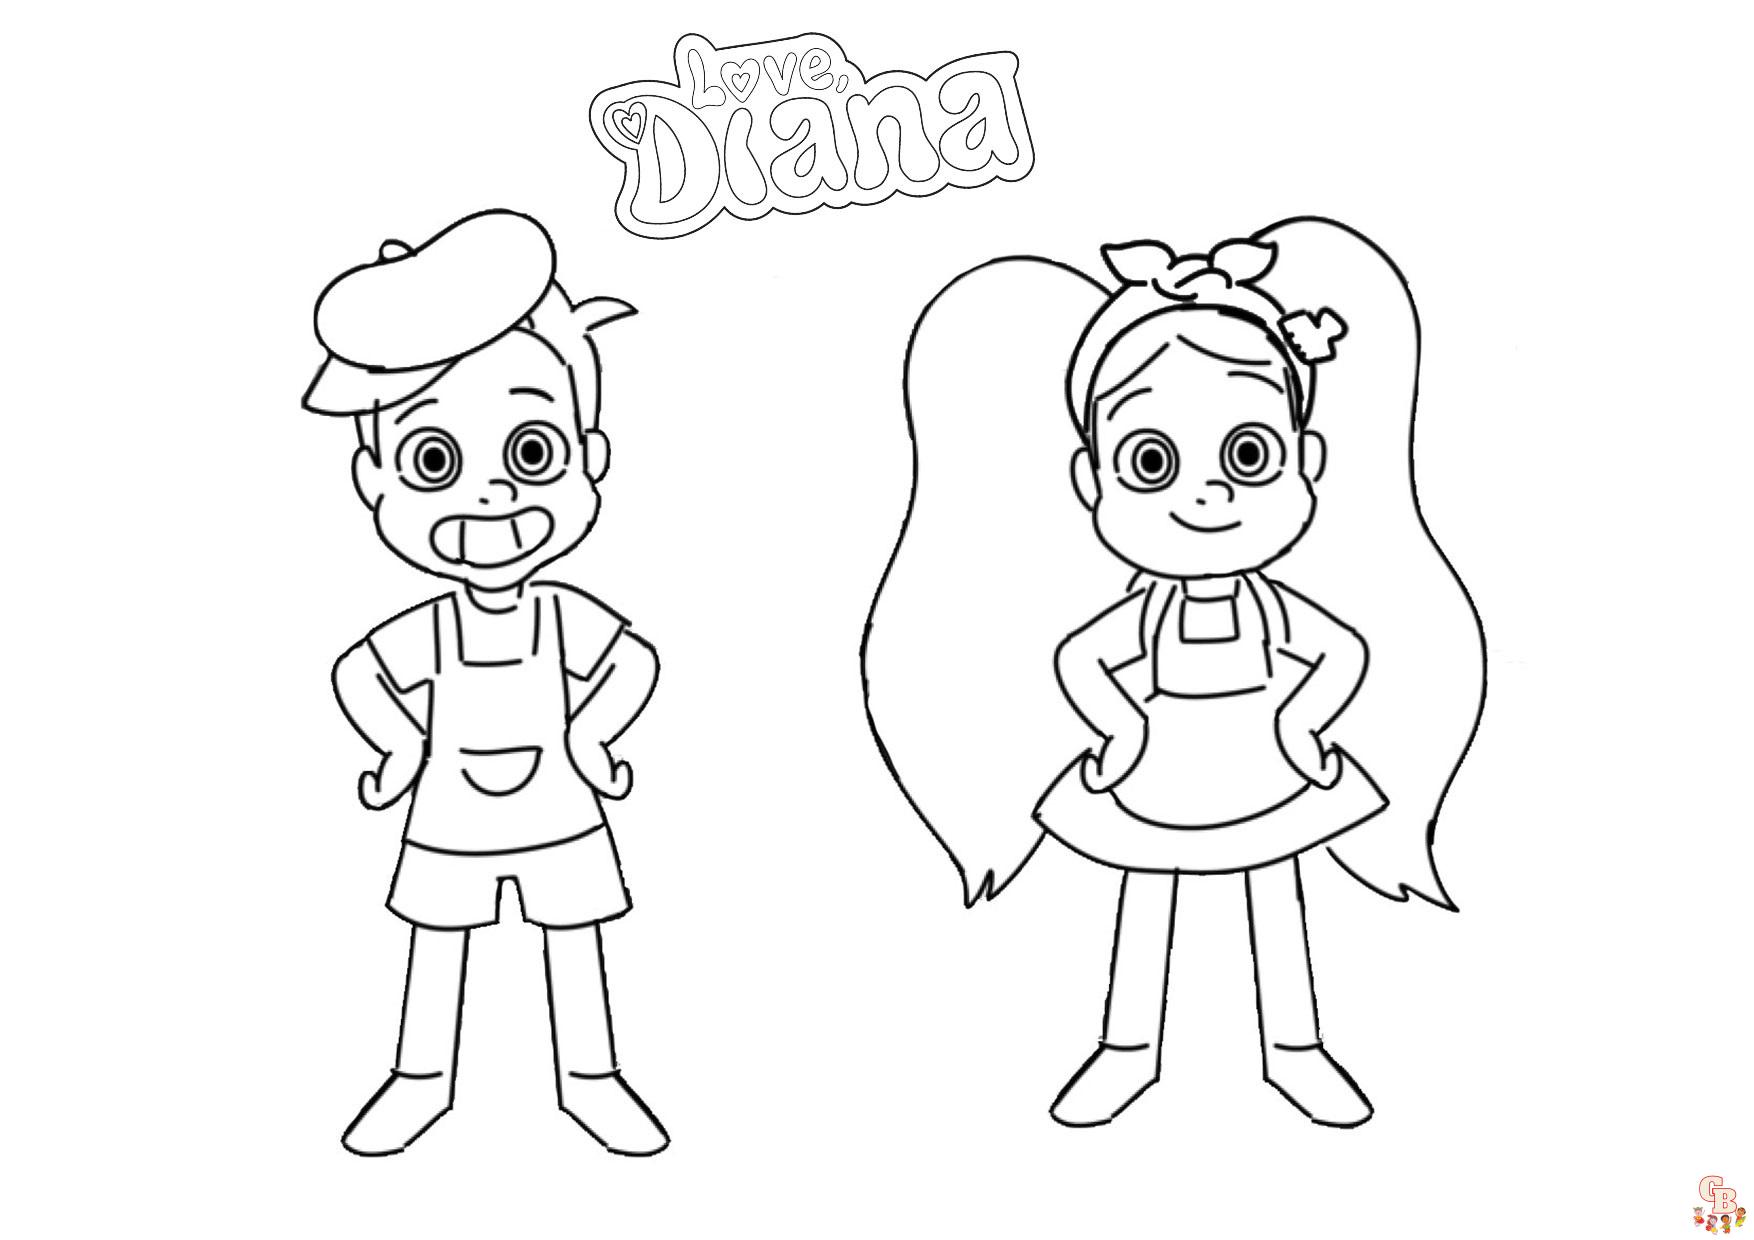 Diana and Roma Coloring Pages 7